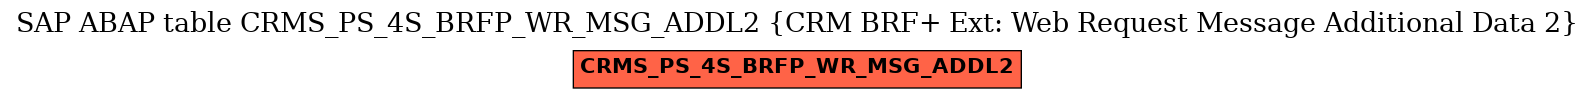 E-R Diagram for table CRMS_PS_4S_BRFP_WR_MSG_ADDL2 (CRM BRF+ Ext: Web Request Message Additional Data 2)